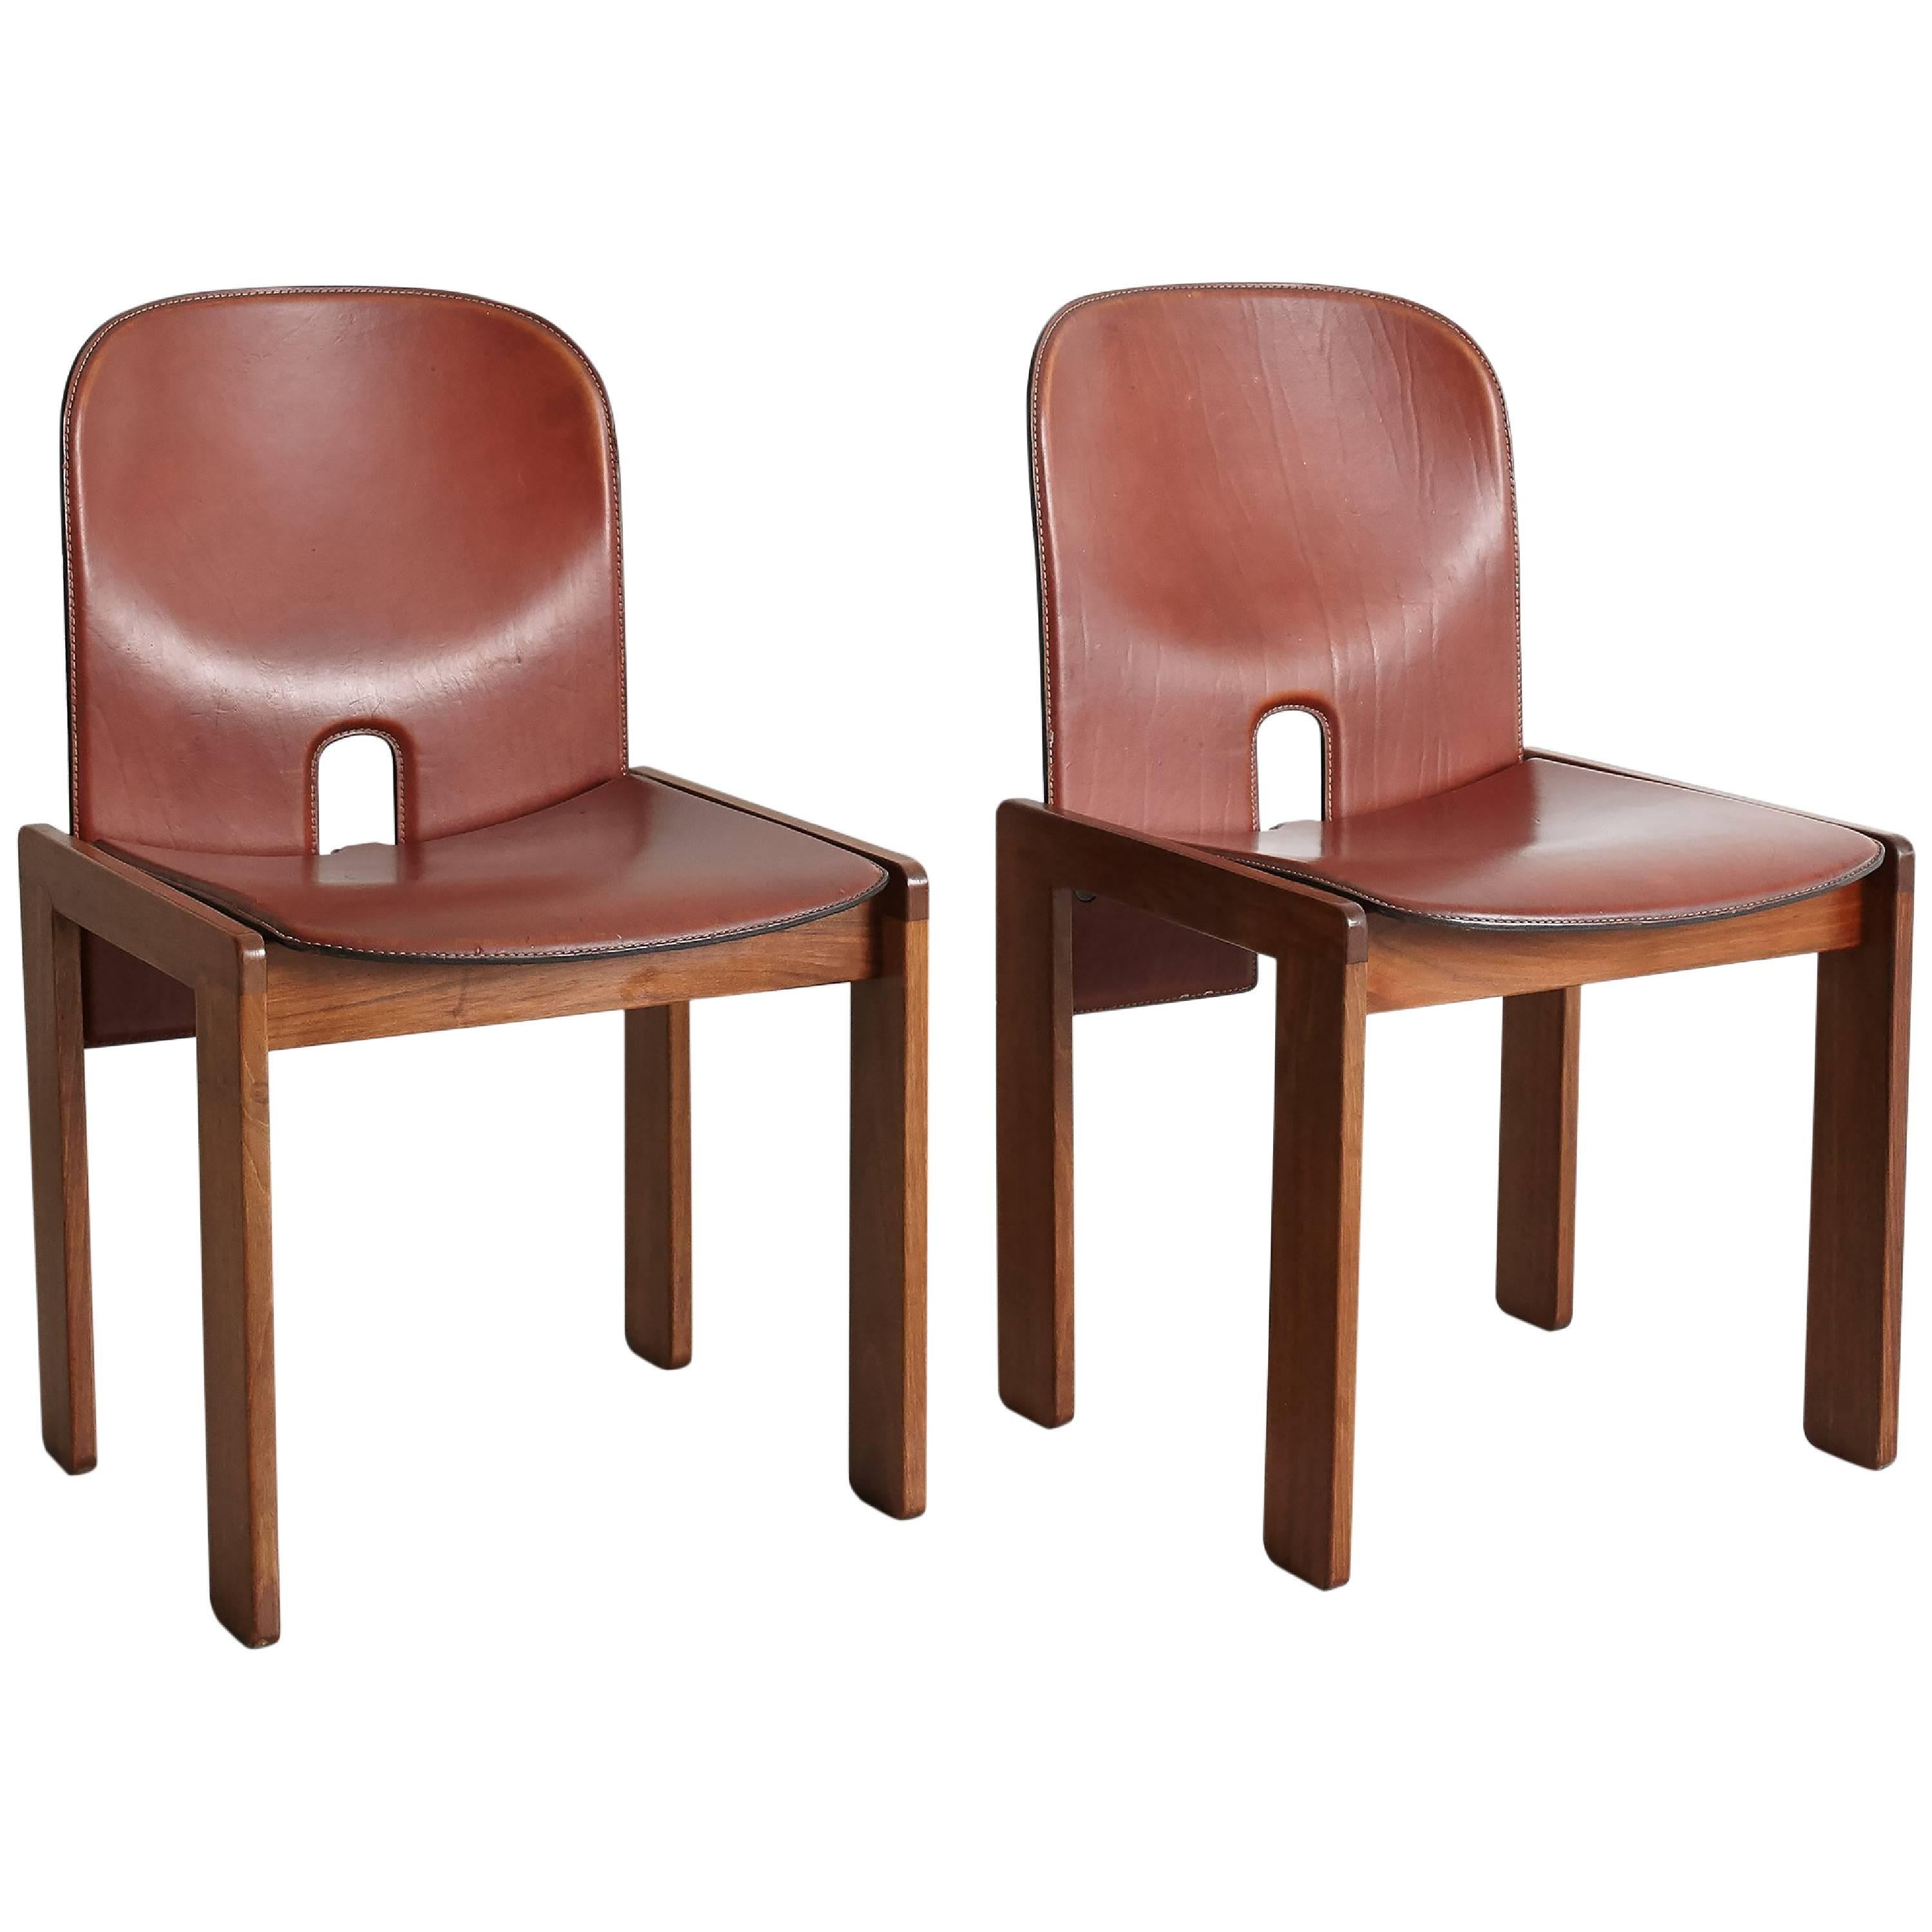 Pair of Tobia Scarpa Dining Chairs